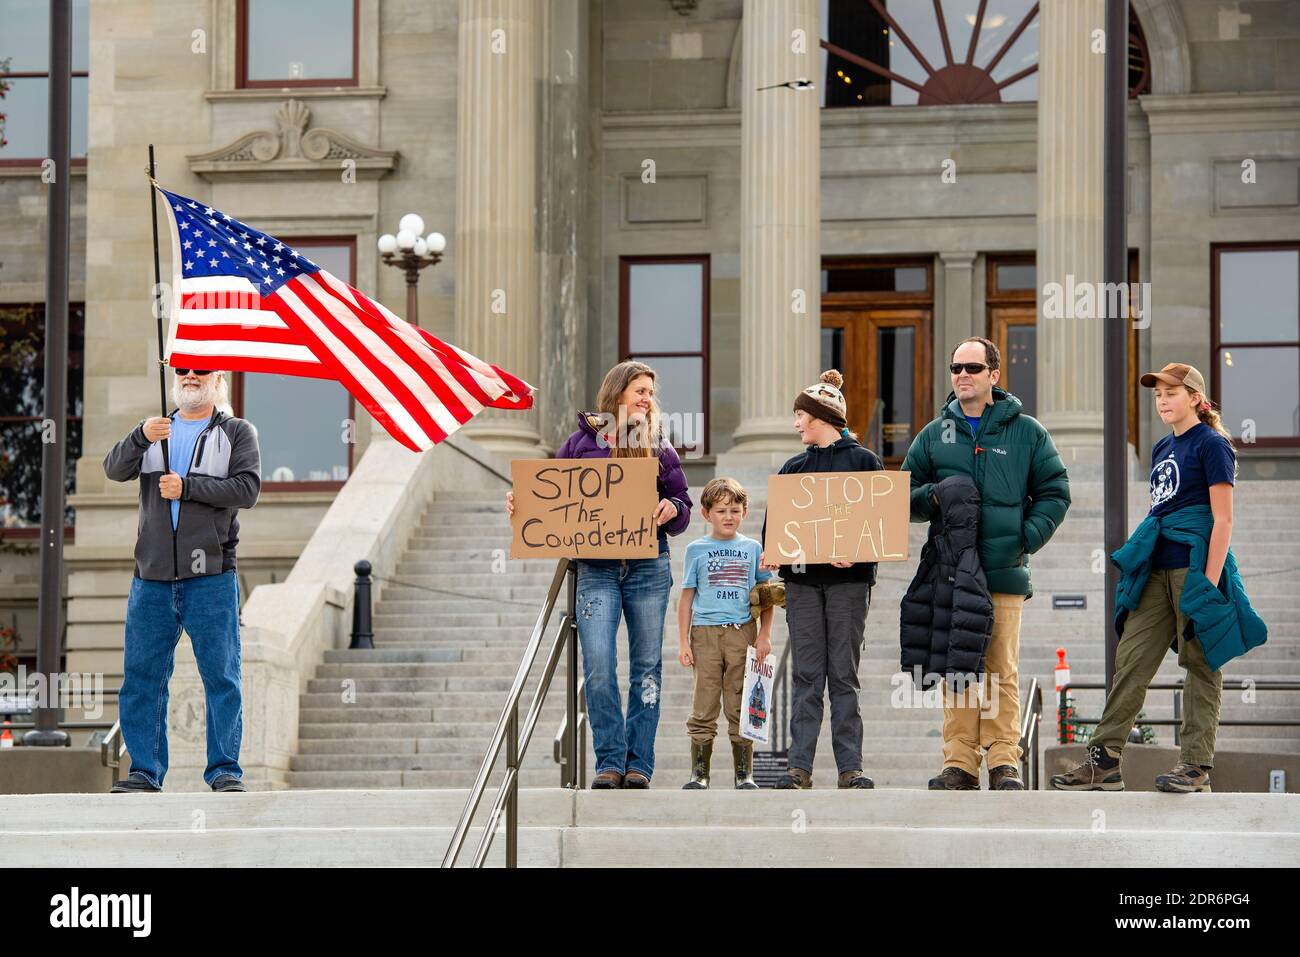 Helena, Montana - Nov 7, 2020: Family protests at Stop the Steal rally, perceive election was stolen from Donald Trump by Joe Biden, holding sign Stop Stock Photo